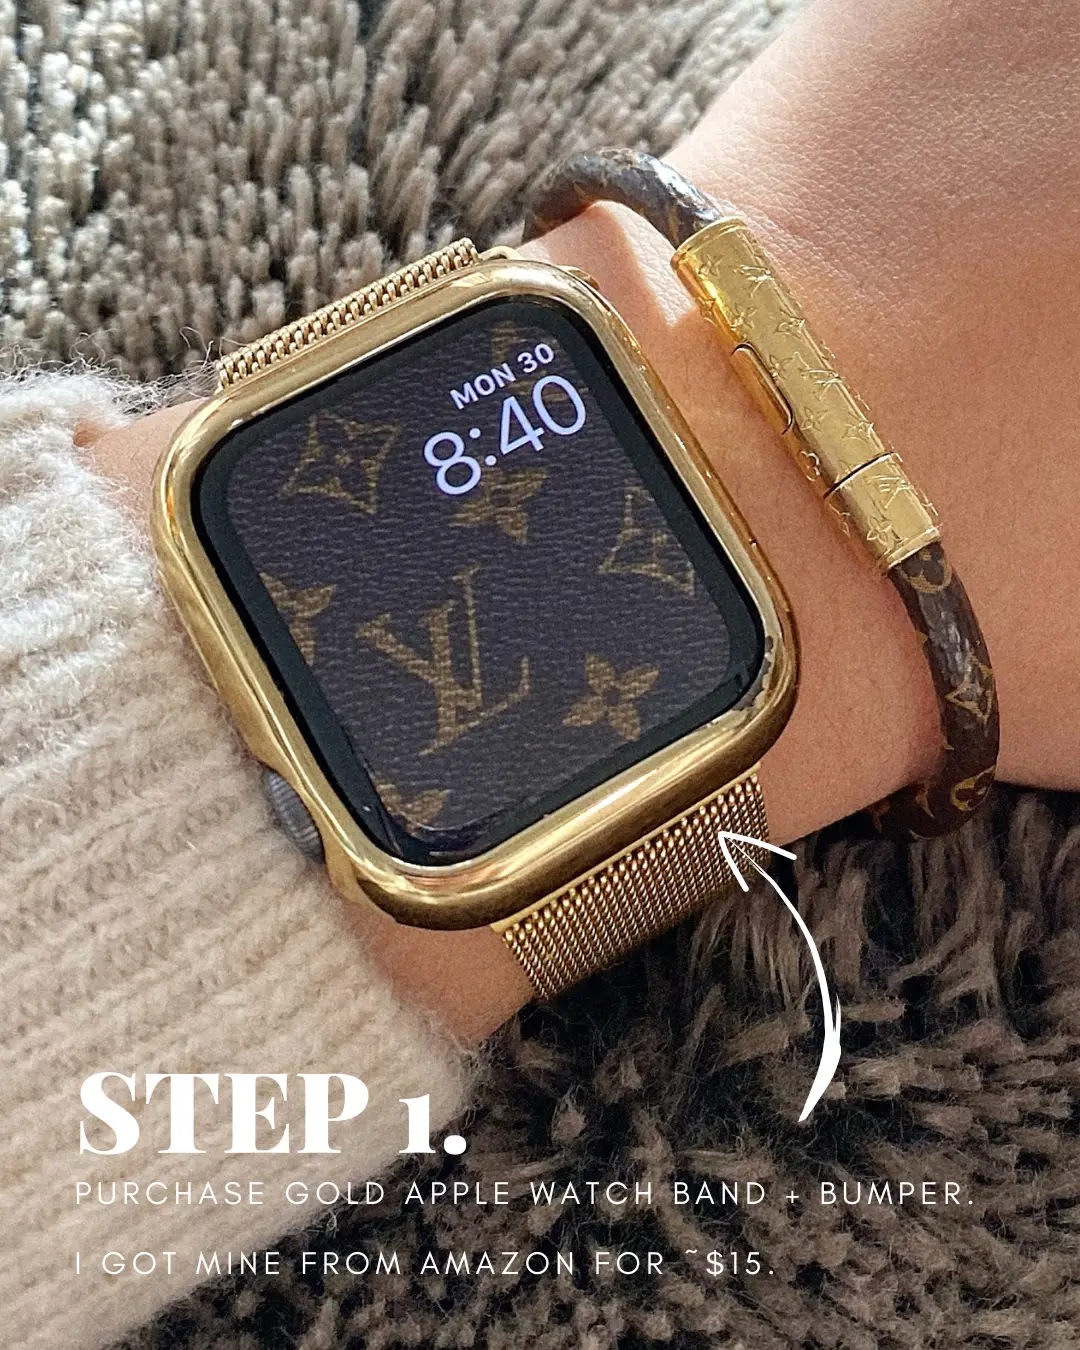 Watch Band Charms - Water Resistant Stainless Steel Sparkling Decorative  Jewelry Charms (No Band) - Compatible With All Apple Watches, Fitbit Versa